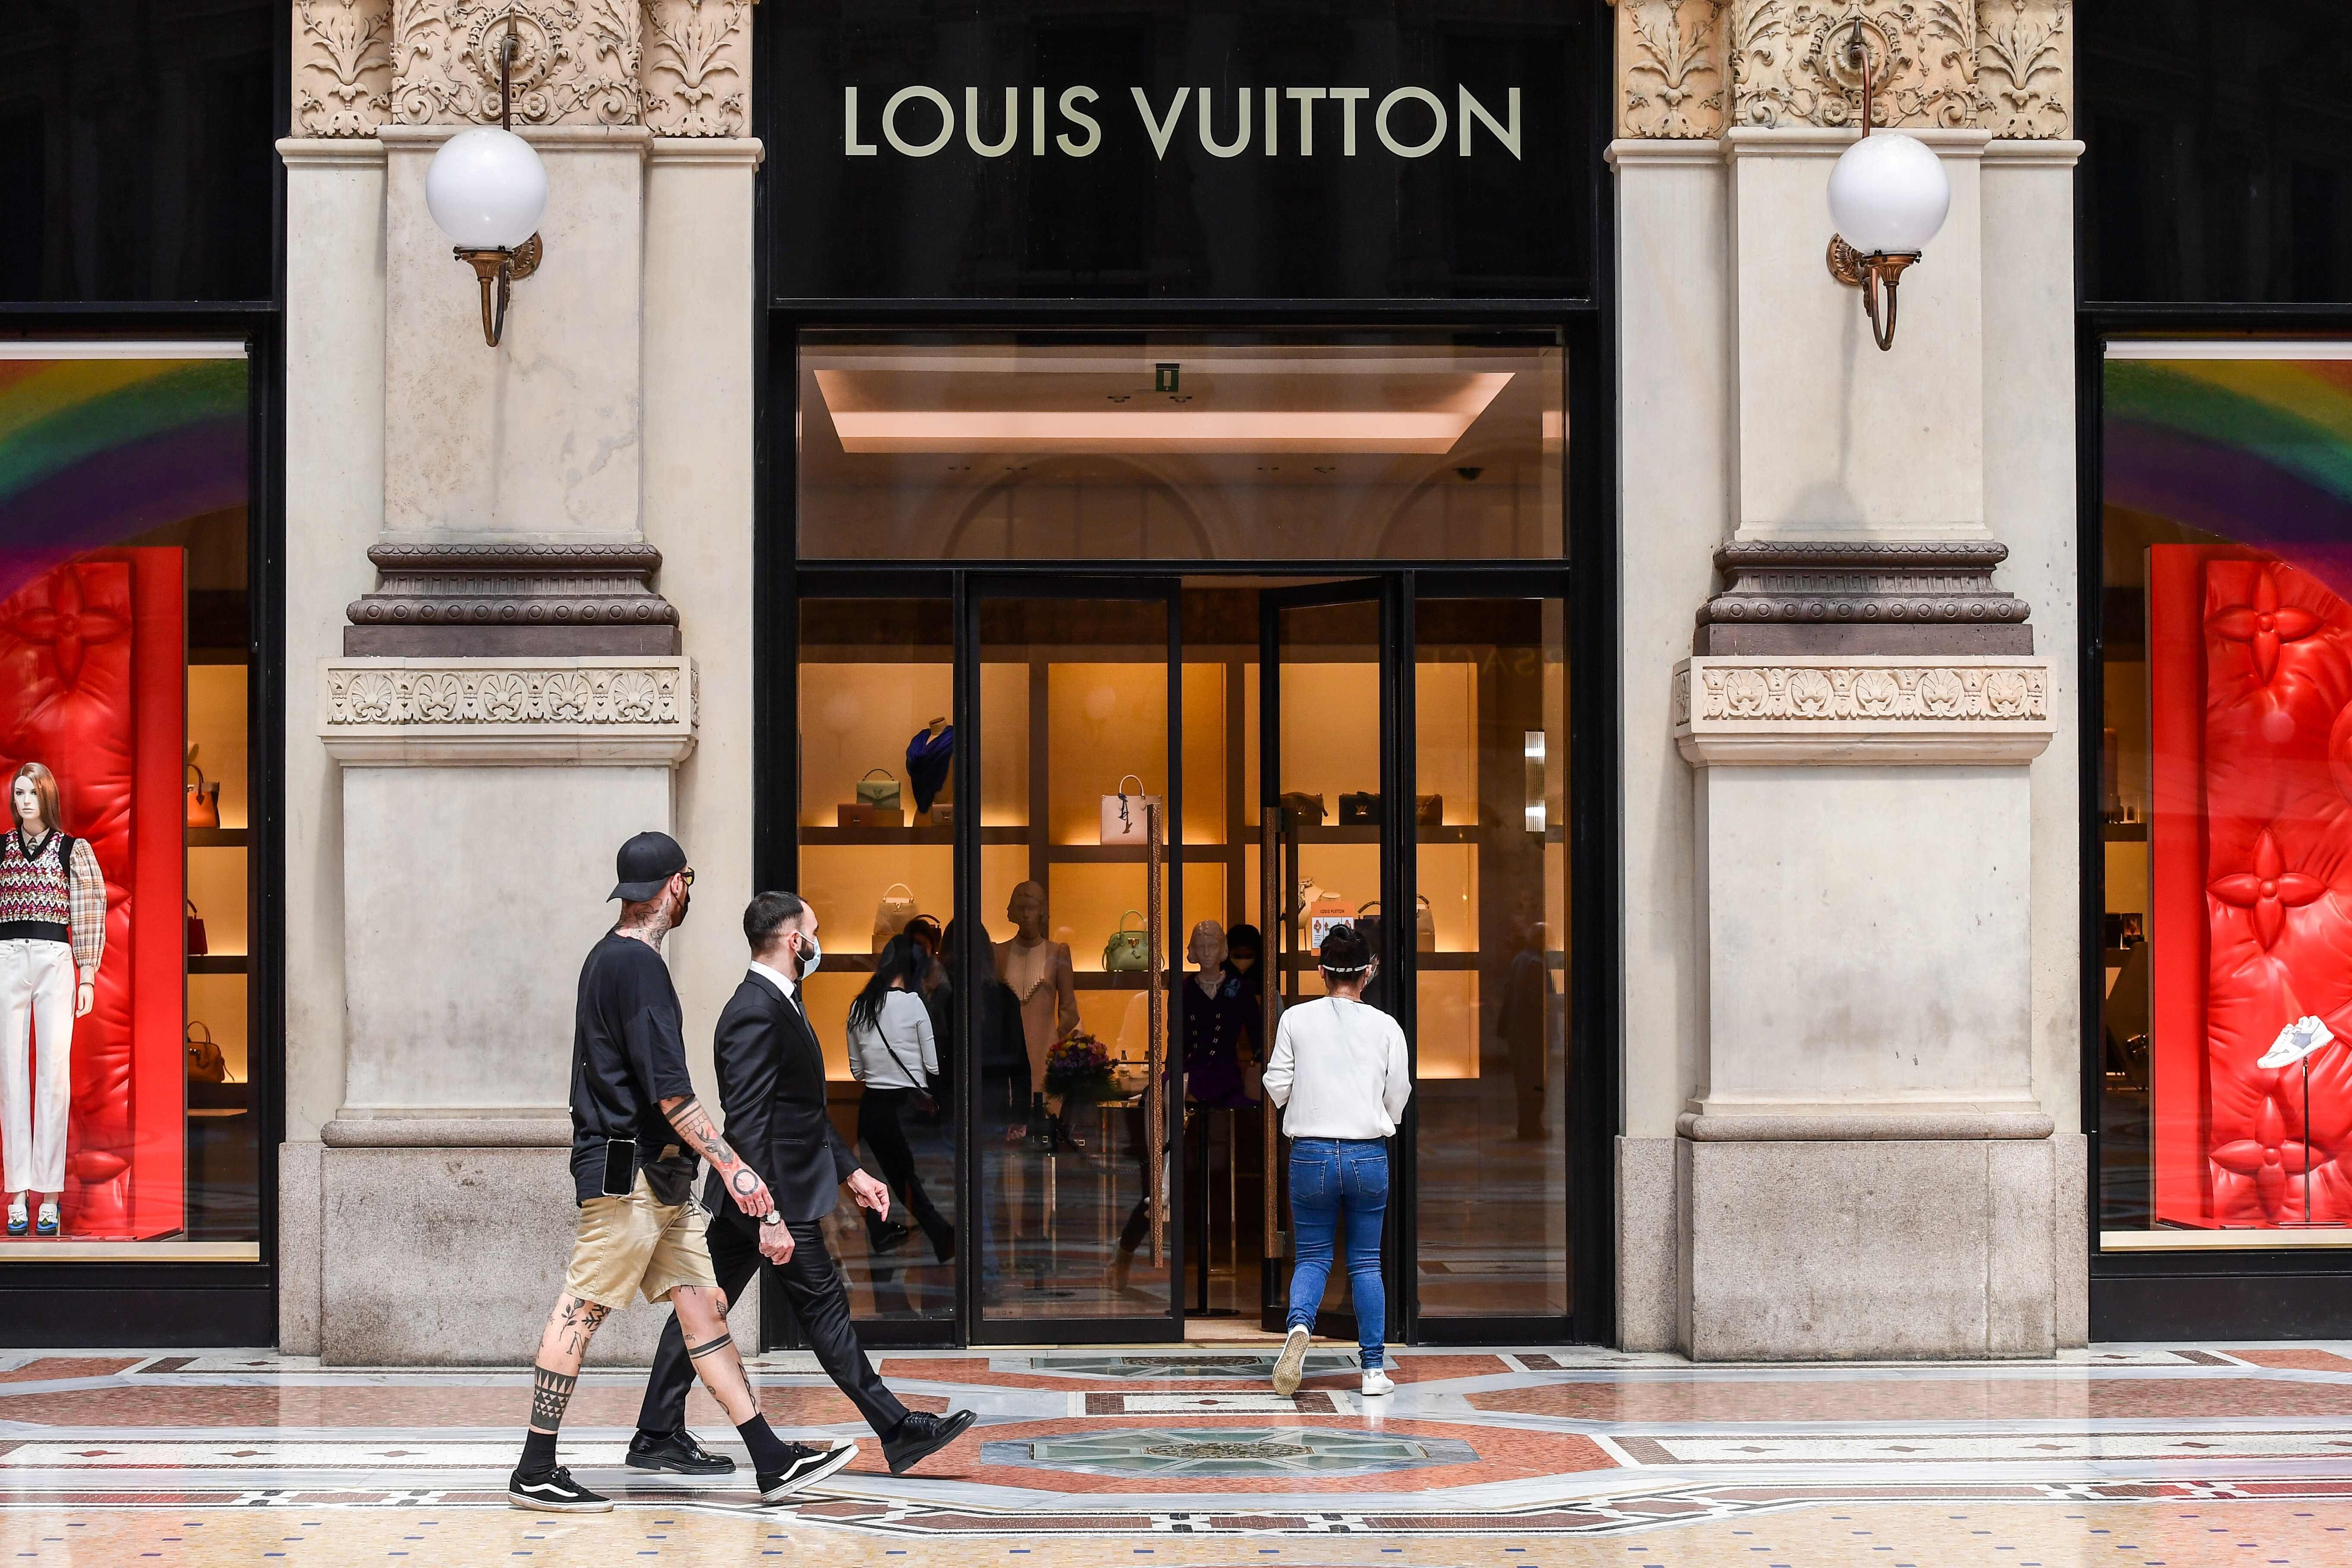 MILAN, ITALY - MAY 30, 2019: Louis Vuitton Store in galleria